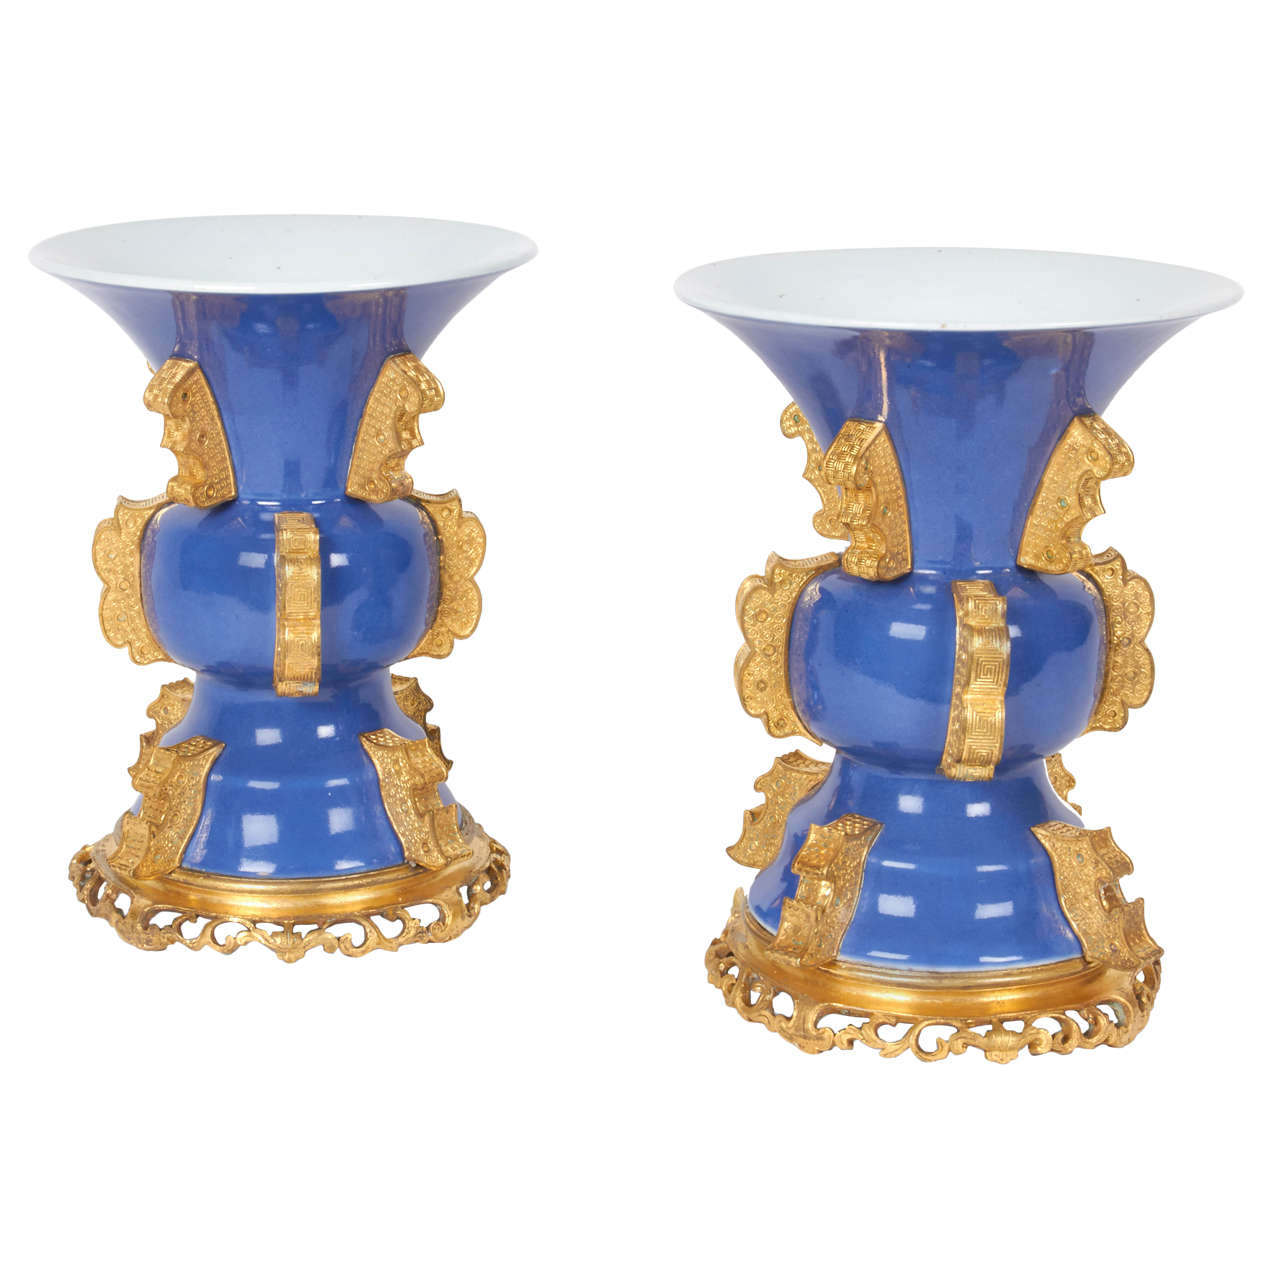 Pair of Chinese Blue Poudre Porcelain and Ormolu Vases in the Archaic Style